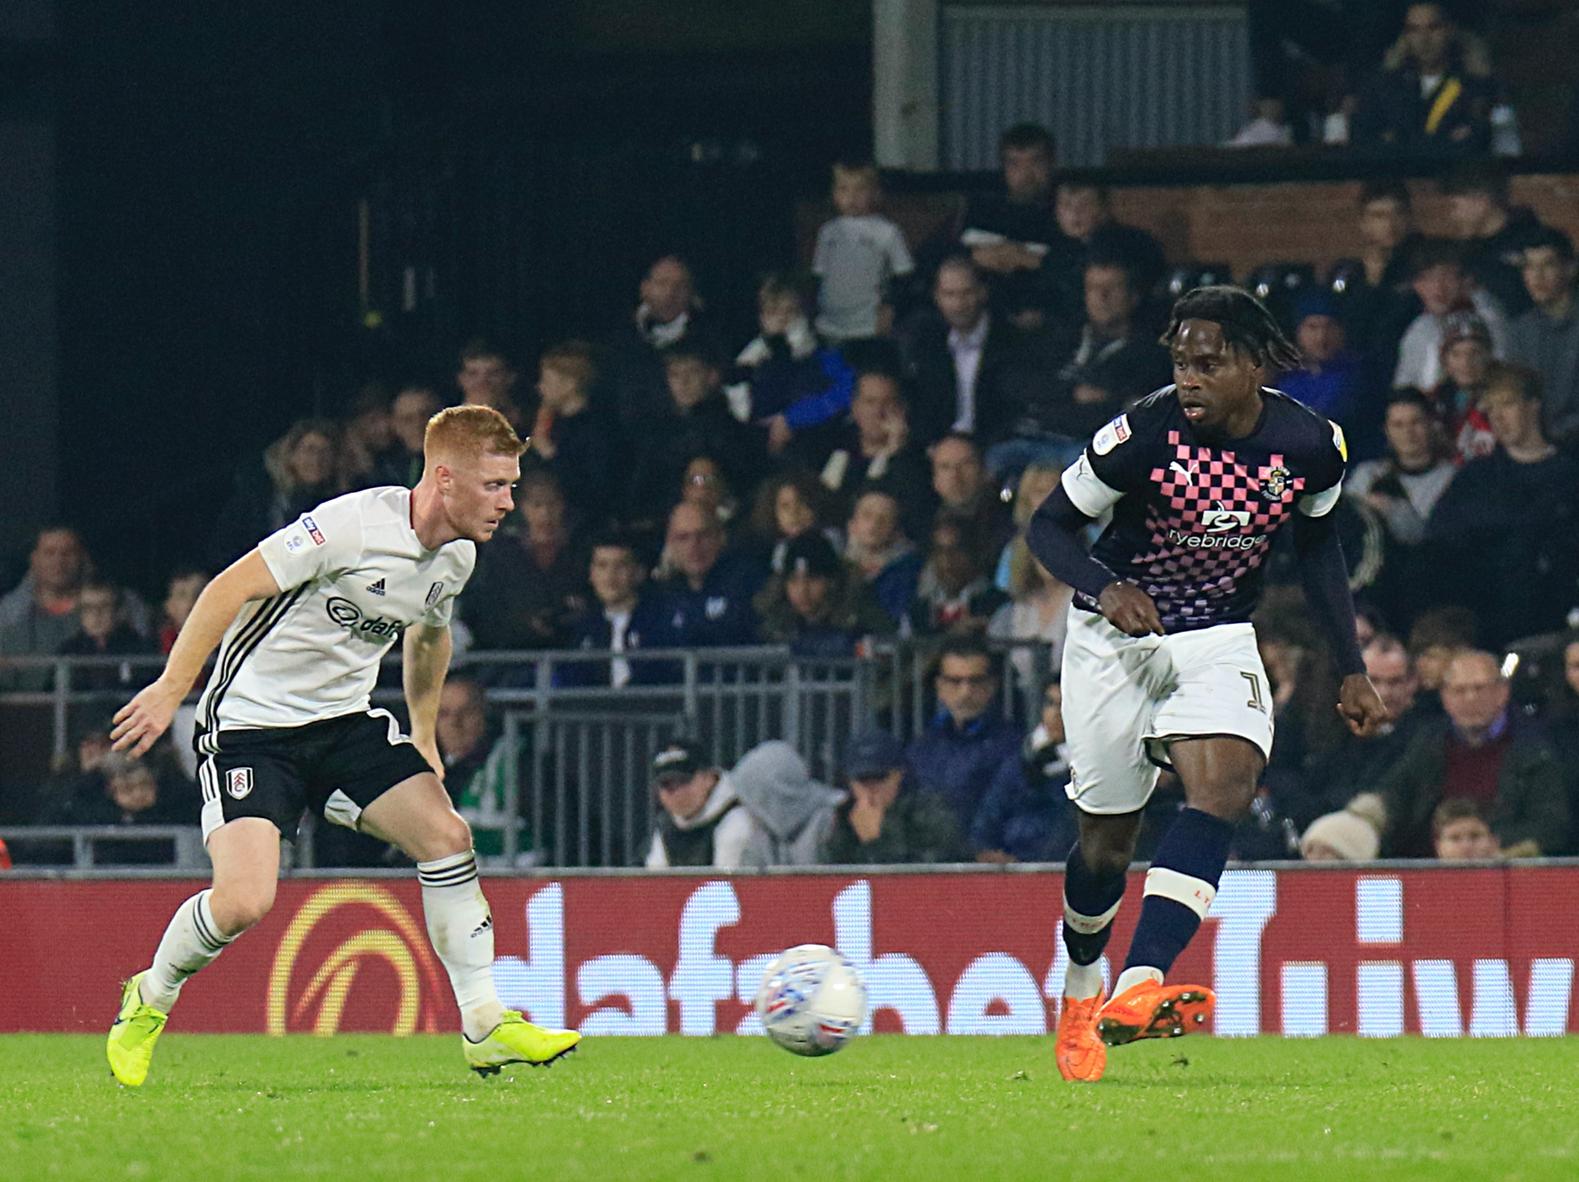 Coped with the bigger stage as he was confident on the ball once more. Good end product in the second period, as it was his raids down the right that saw Luton start to put some promising attacks together.